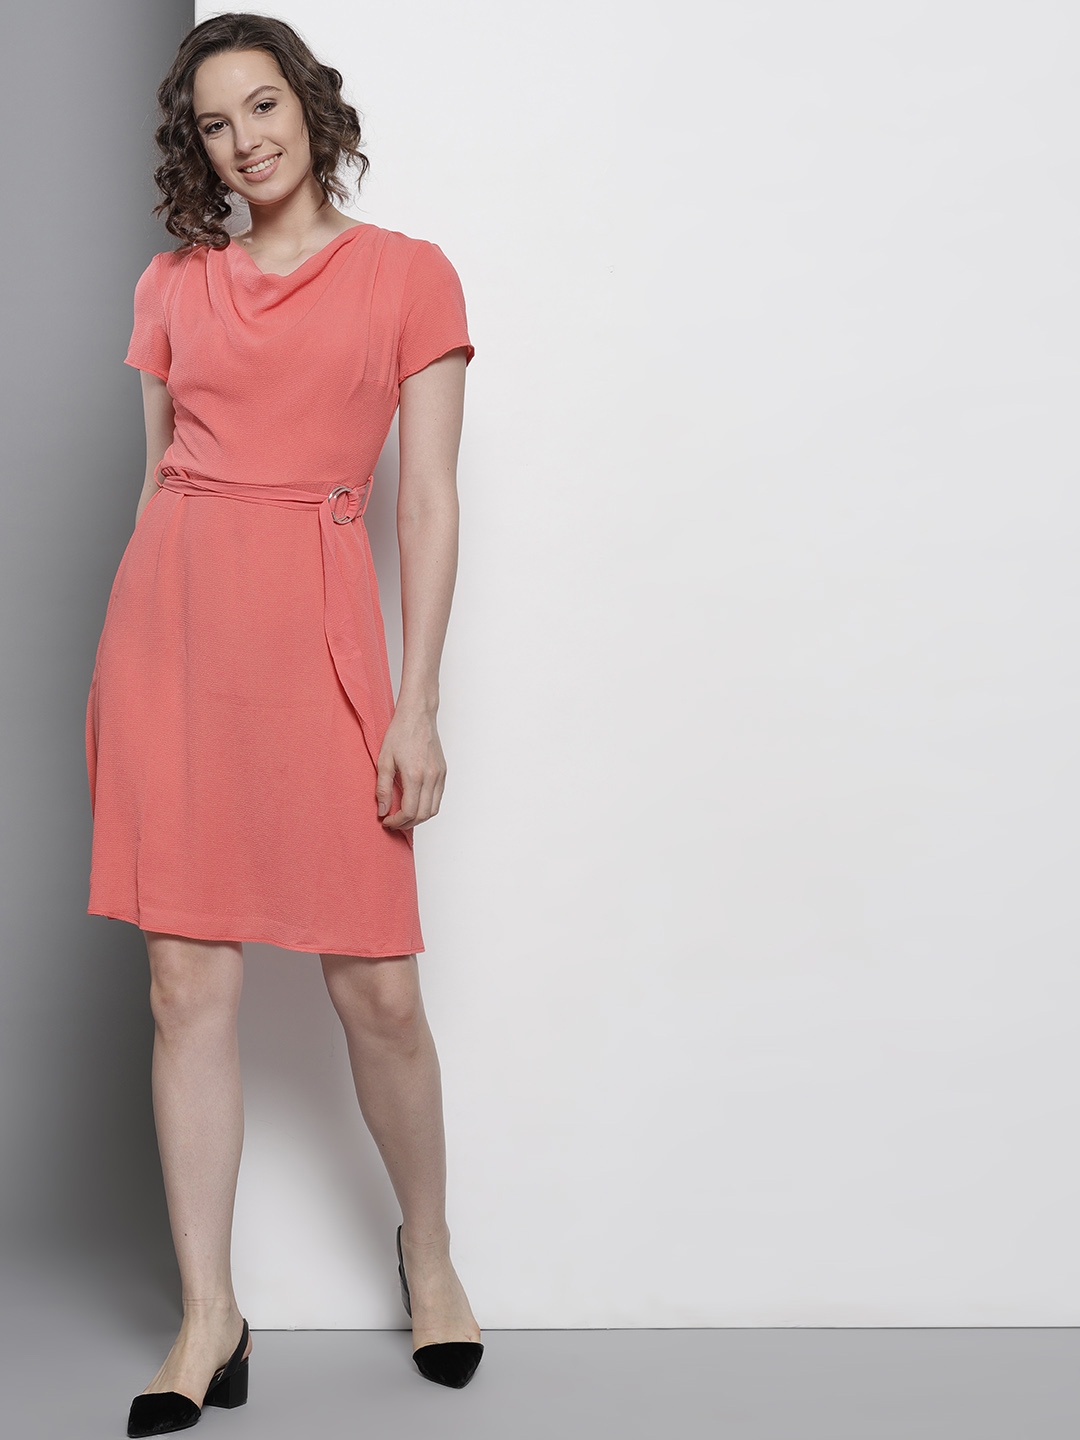 Buy DOROTHY PERKINS Women Coral Pink Solid A Line Dress - Dresses for Women 5831342 | Myntra